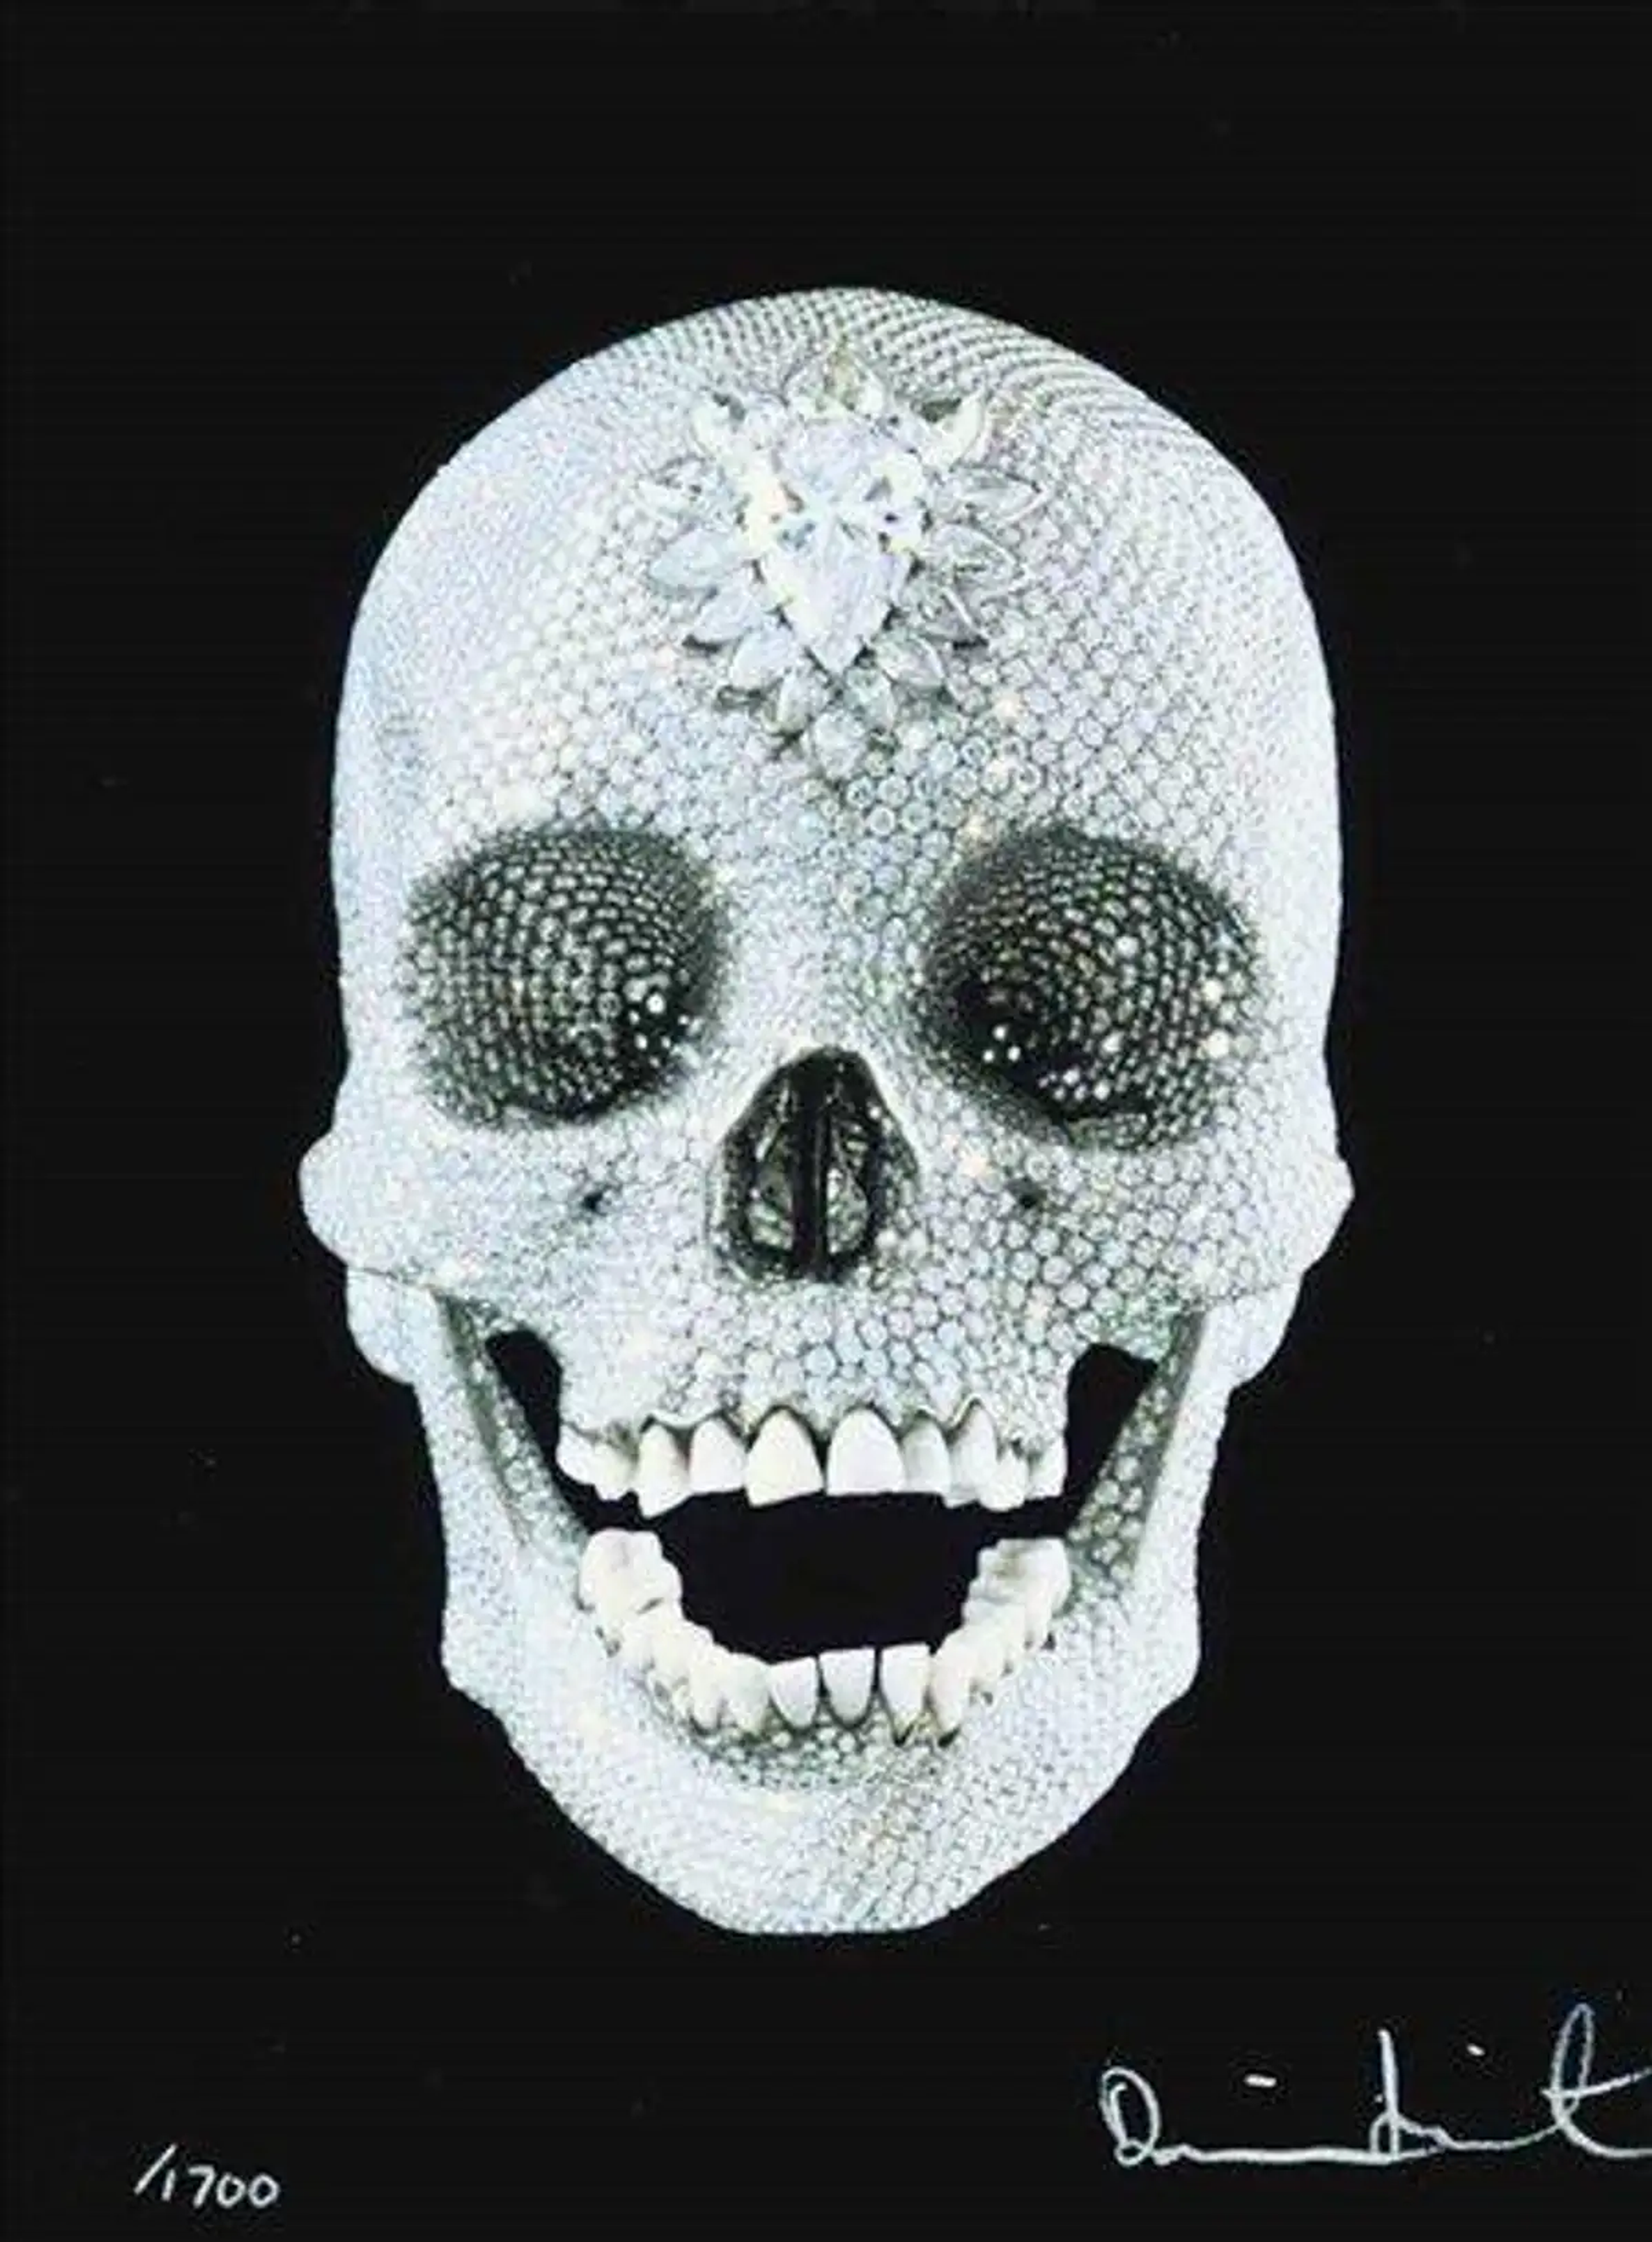 An image of a print by Damien Hirst, showing his infamous diamond-encrusted skull against a black background.